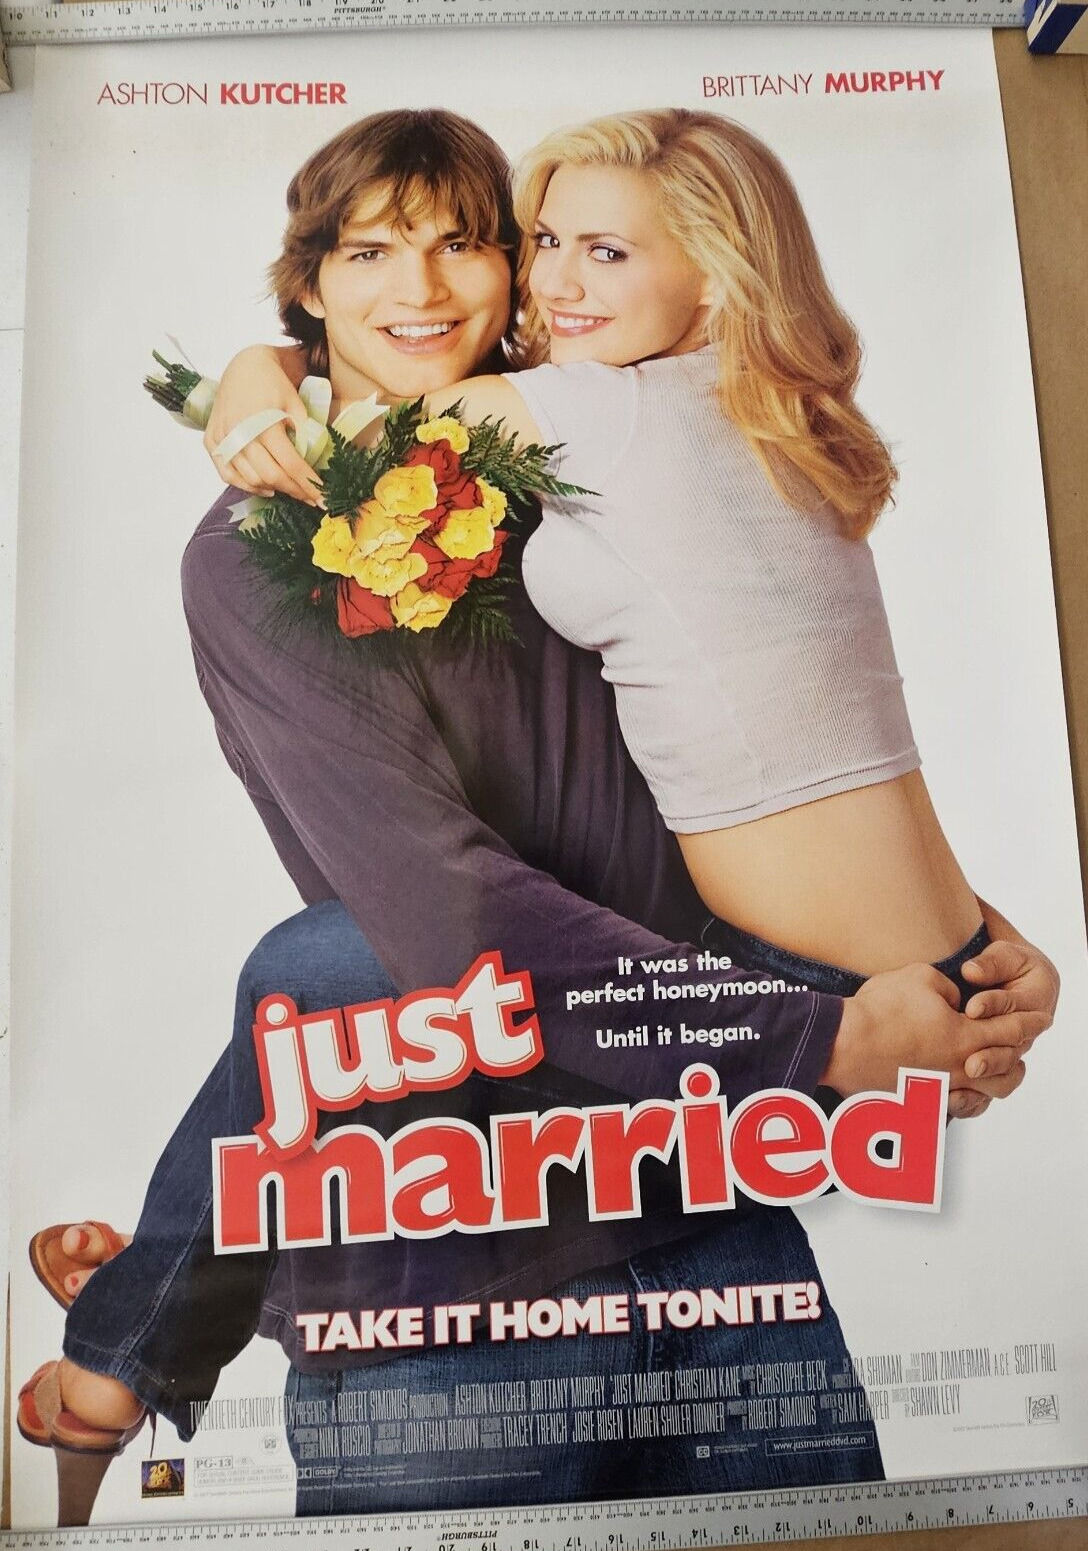 Ashton  Kutcher  Britany Murphy in Just Married 27 x 40  DVD  Movie poster